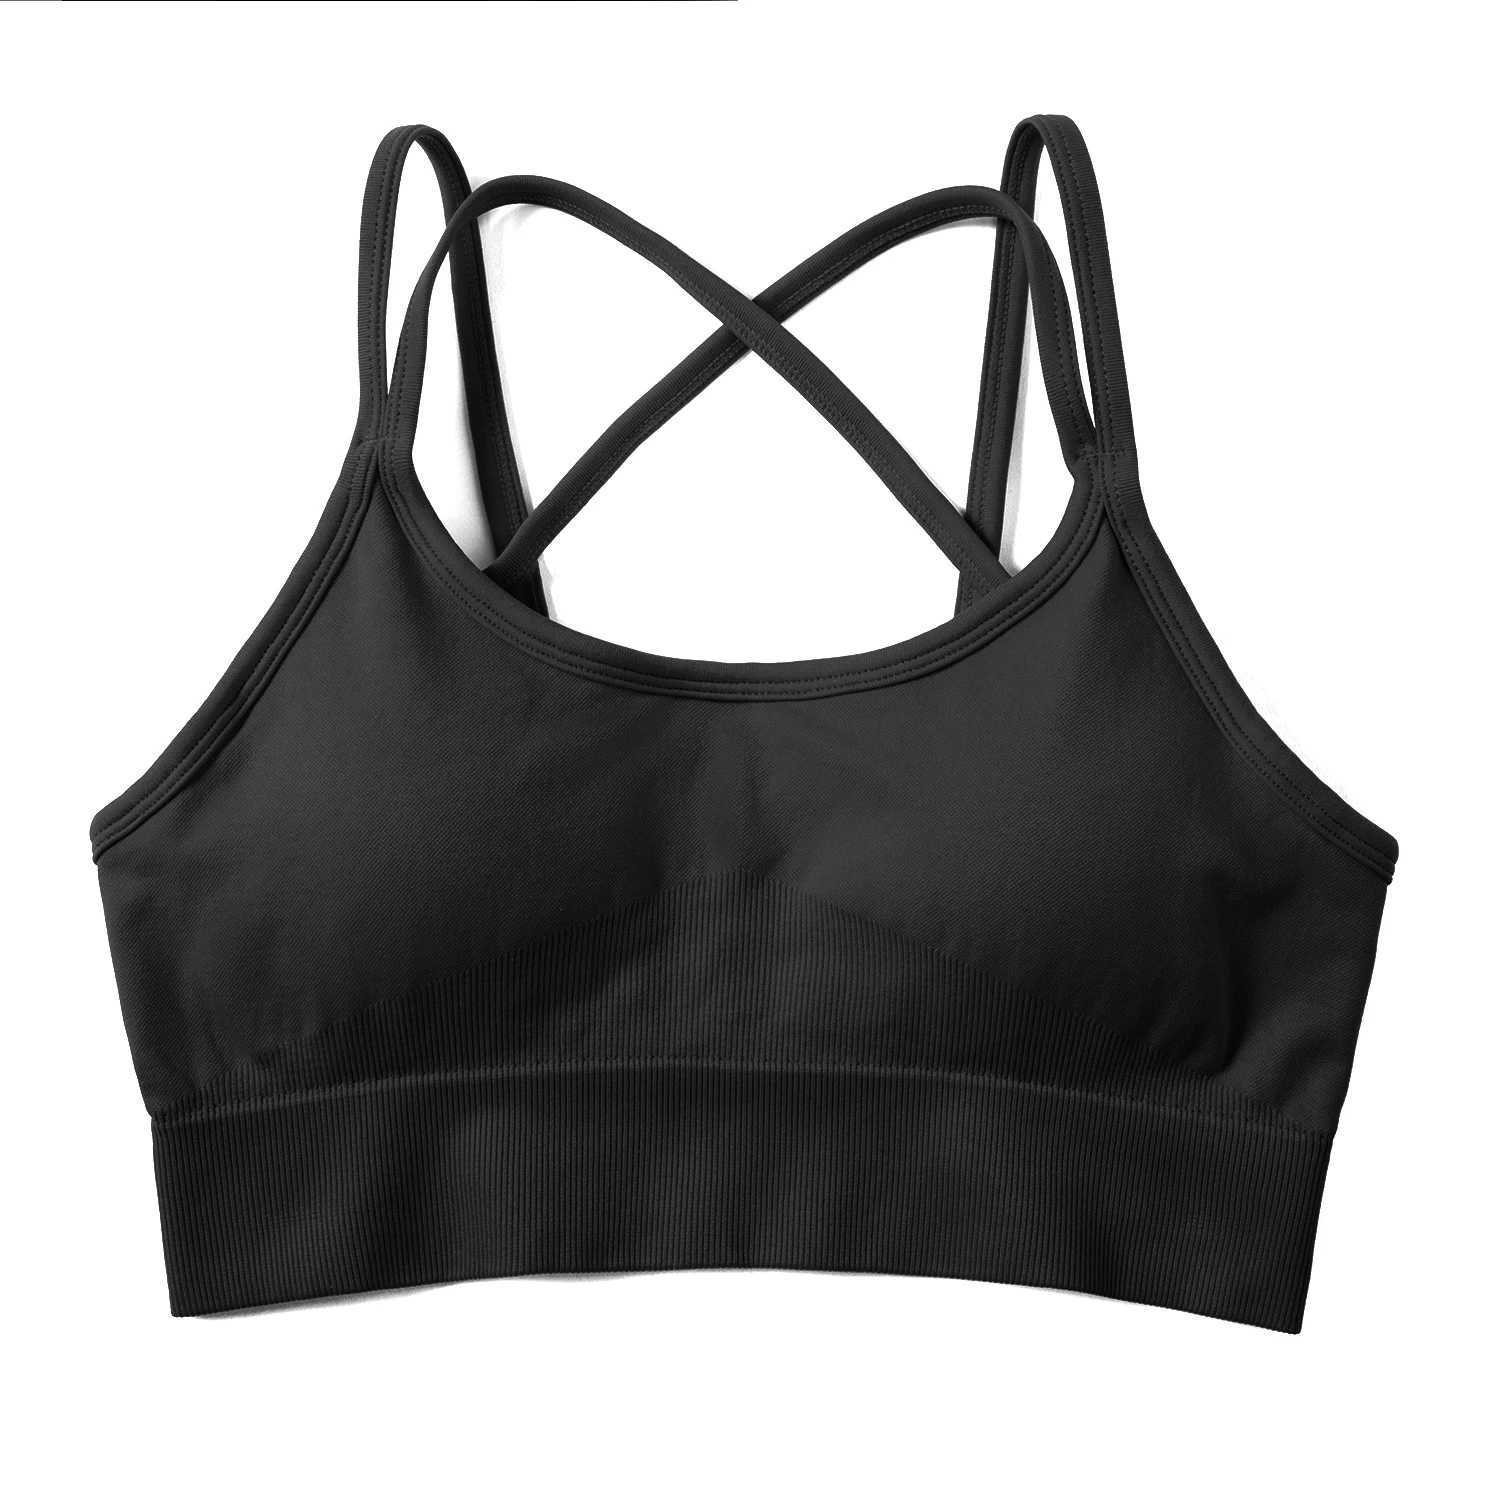 Tracksuits voor dames Yoga Set Gym Set Women Yoga Shorts Crop Top Sport Bra Mouwloze lopende trainingen Outfit Fitness Naadloze Gym Suits Mujerl2403